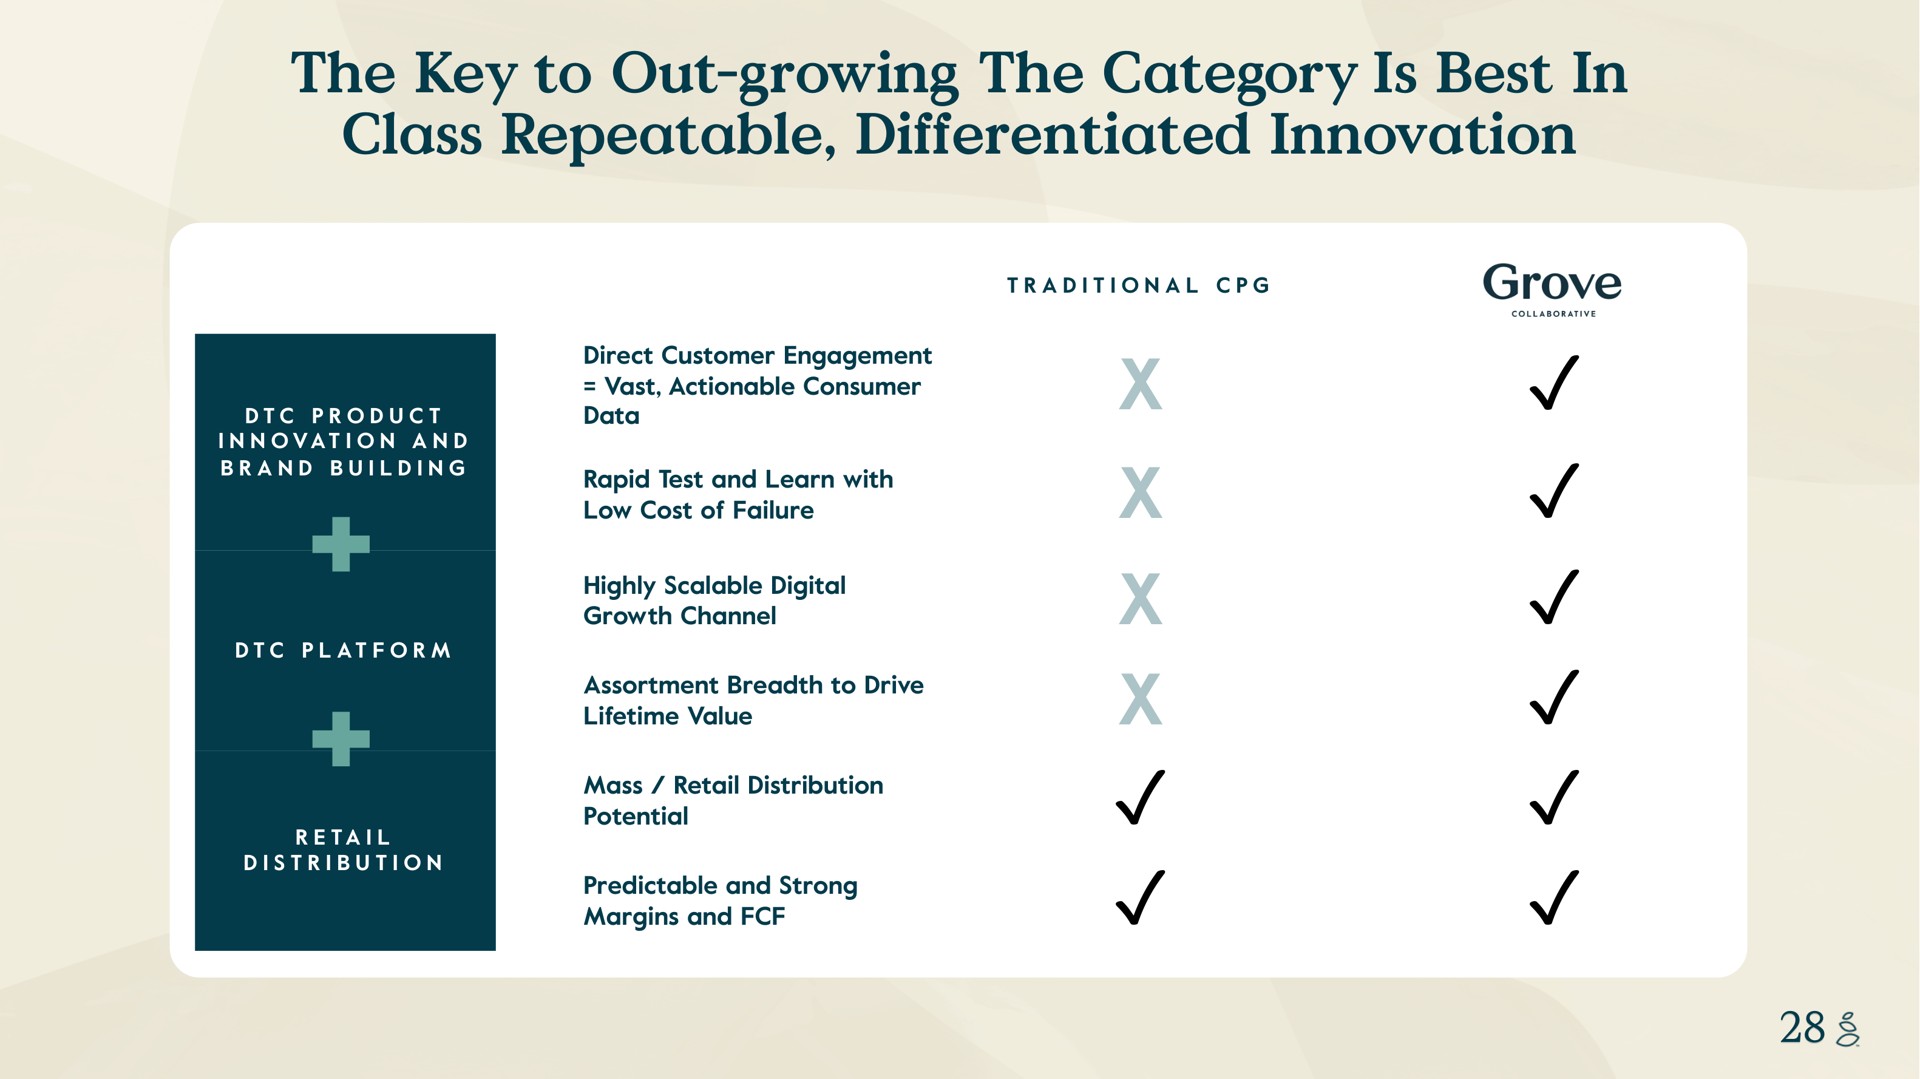 the key to out growing the category is best in class repeatable differentiated innovation traditional grove product and direct customer engagement vast actionable consumer data rapid test and learn with low cost of failure highly scalable digital growth channel platform lifetime value distribution assortment breadth drive mass retail distribution potential predictable and strong margins and retail | Grove